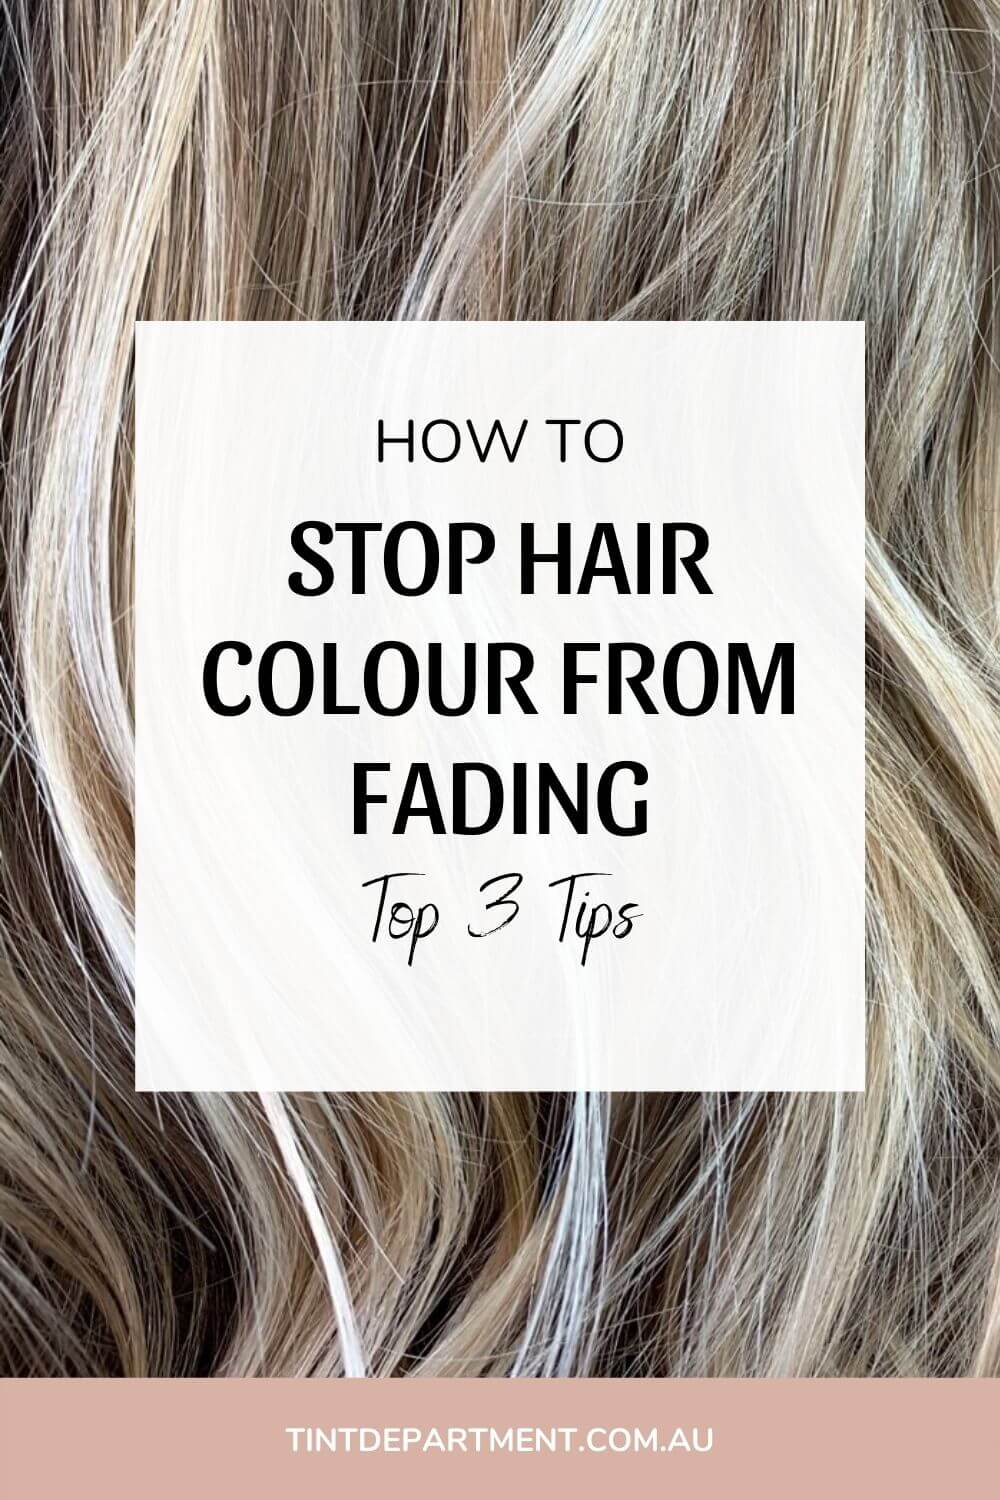 How To Stop Hair Colour From Fading - Top 3 Tips To Stop Colour Washing Out